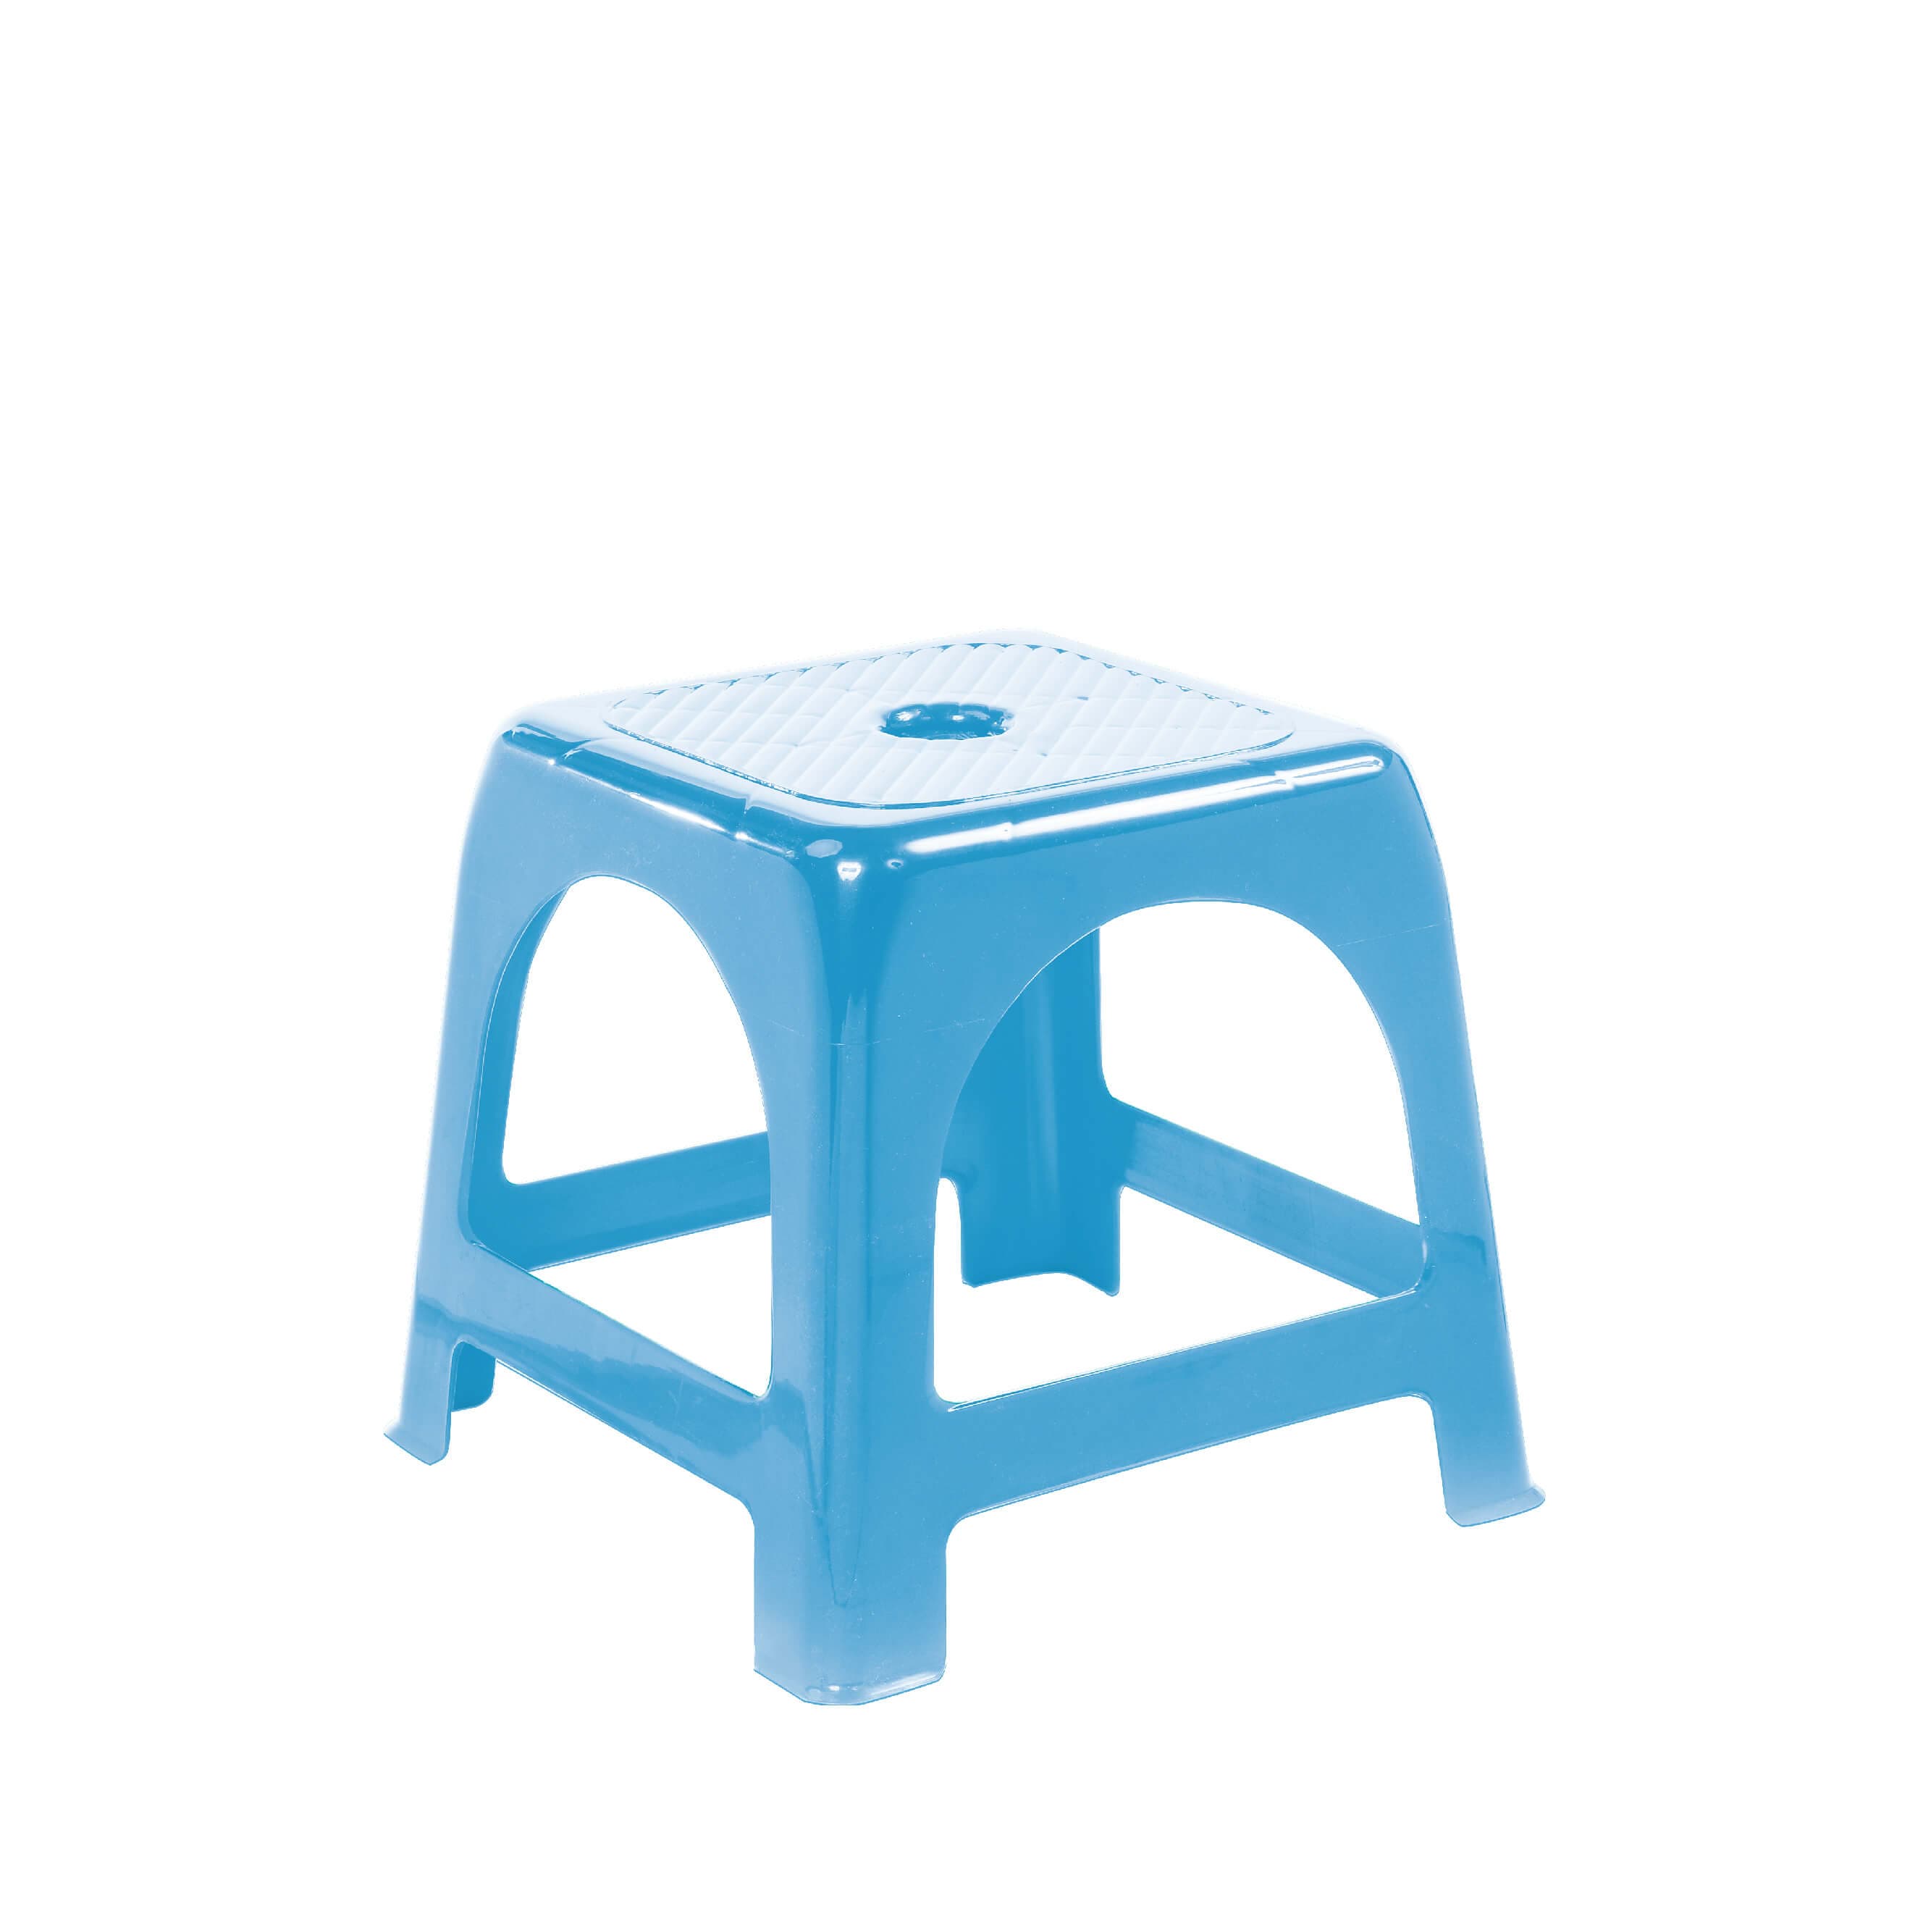 Household _ Plastic Chair _ Small Stool